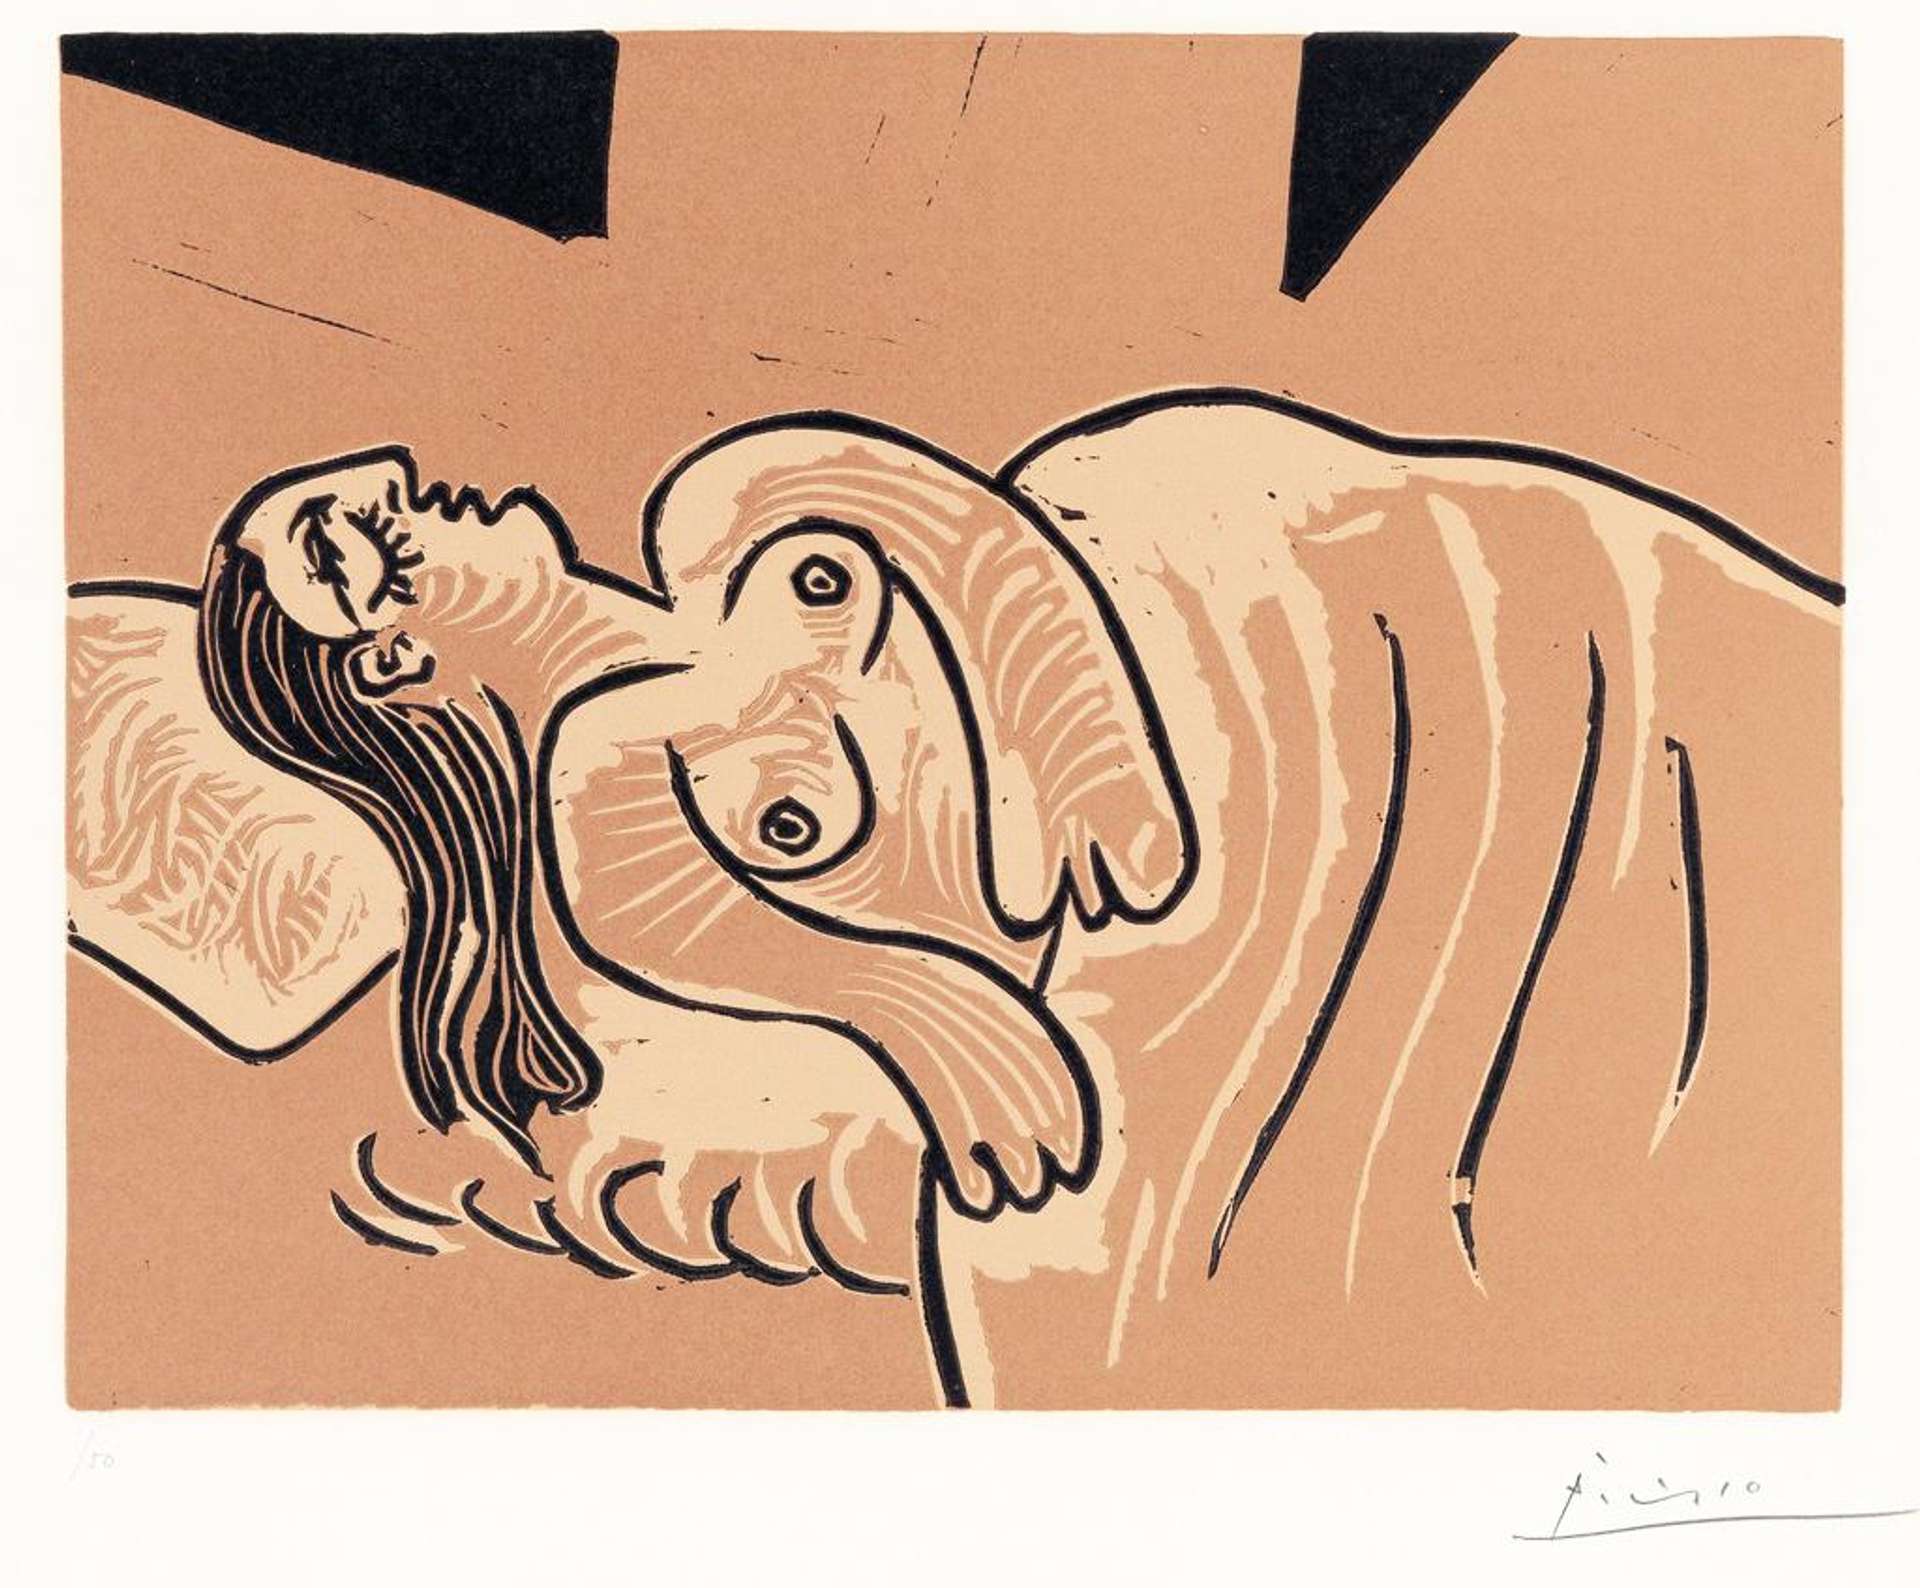 Pablo Picasso's Femme Endormie. Painting of a nude woman lying down in her bed.